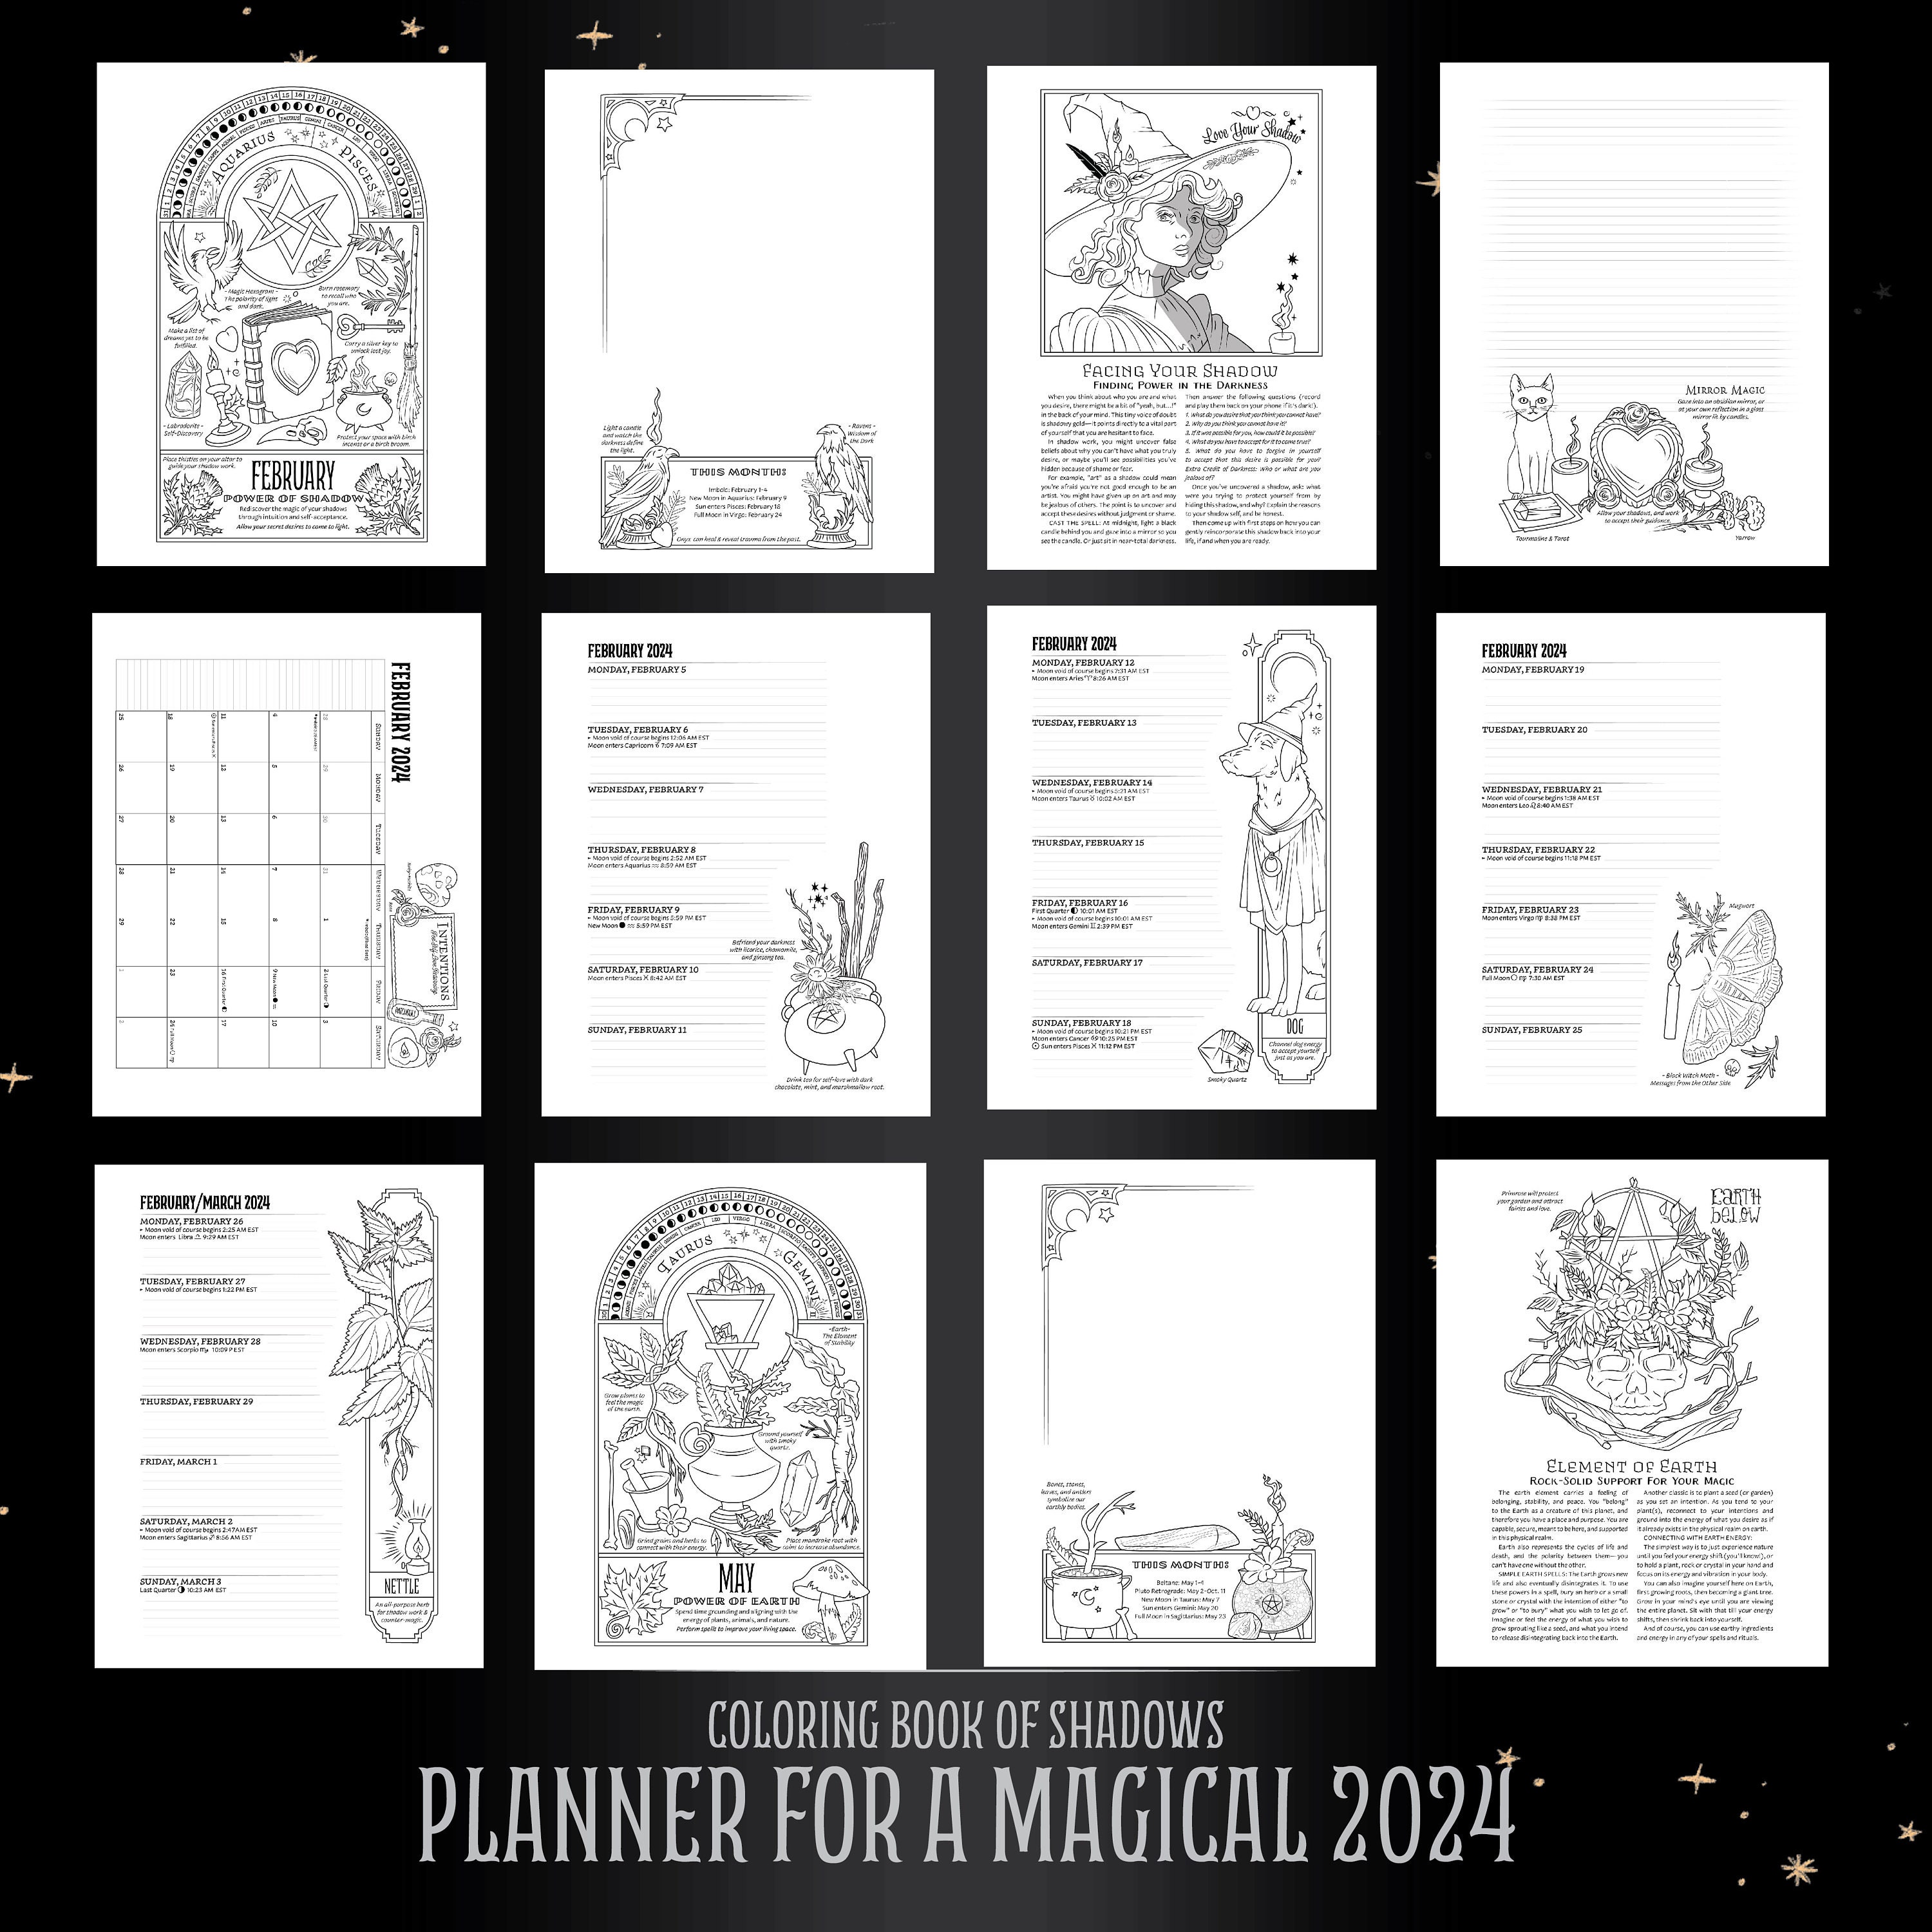 Full Color Planner for a Magical 2024 - Coloring Book of Shadows